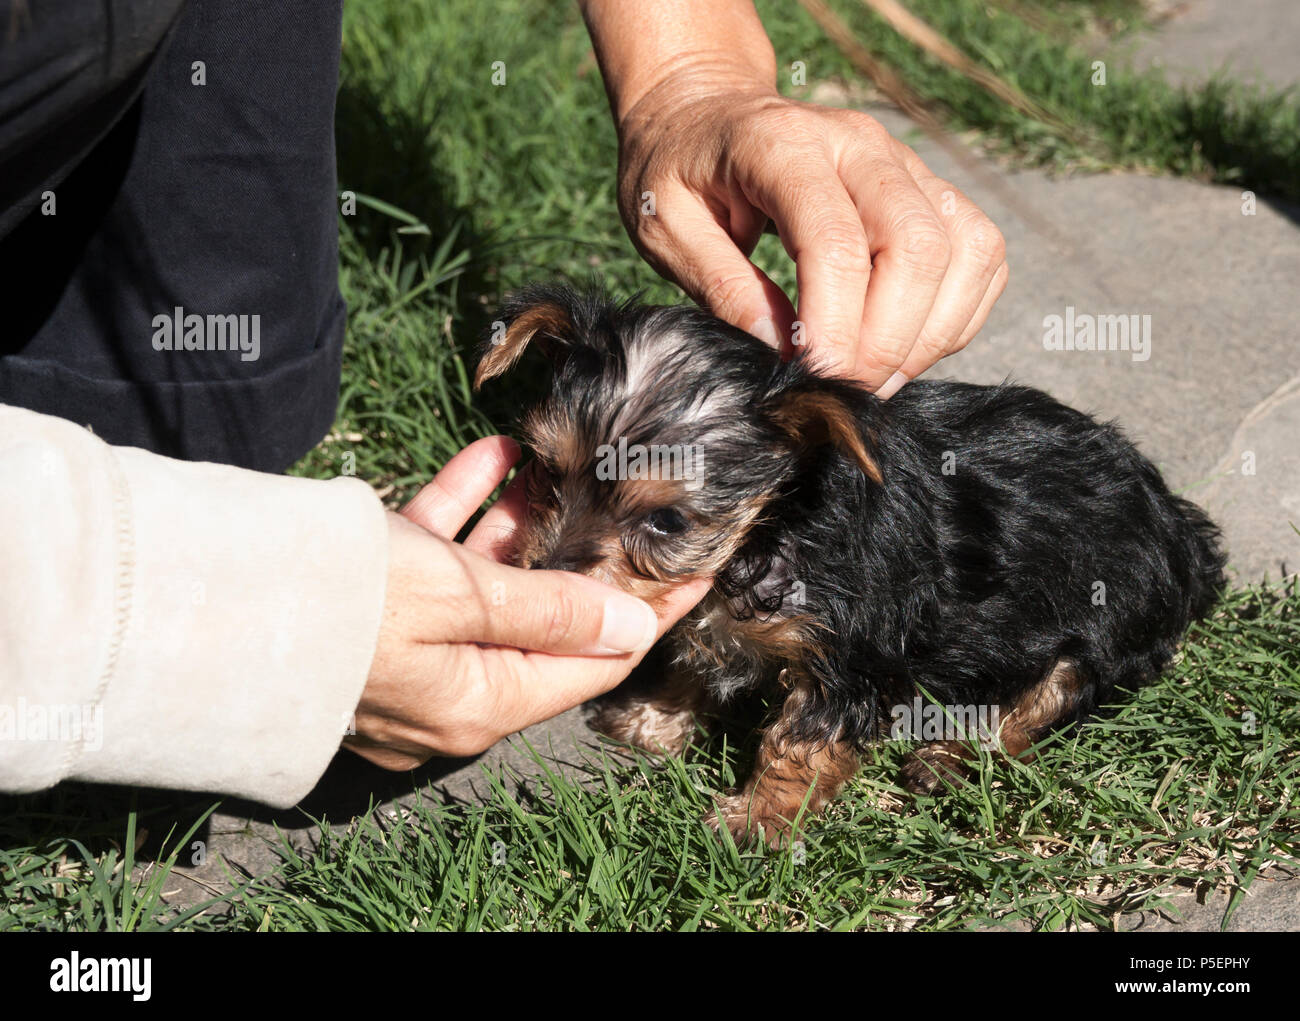 Four week old Yorkshire Terrier puppy Stock Photo